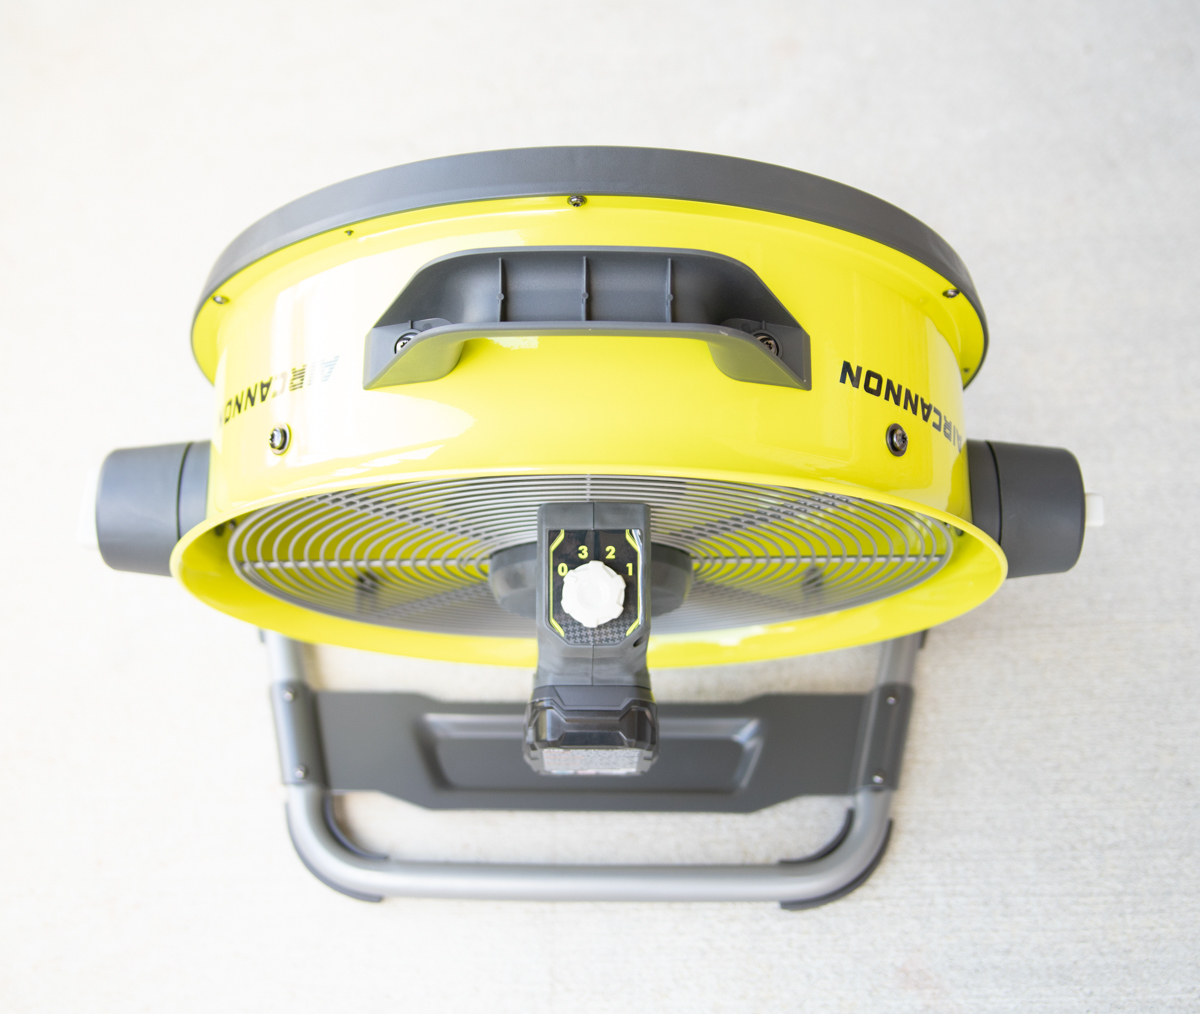 8 Ryobi Tool Sets And Tools To Help With A Natural Disaster